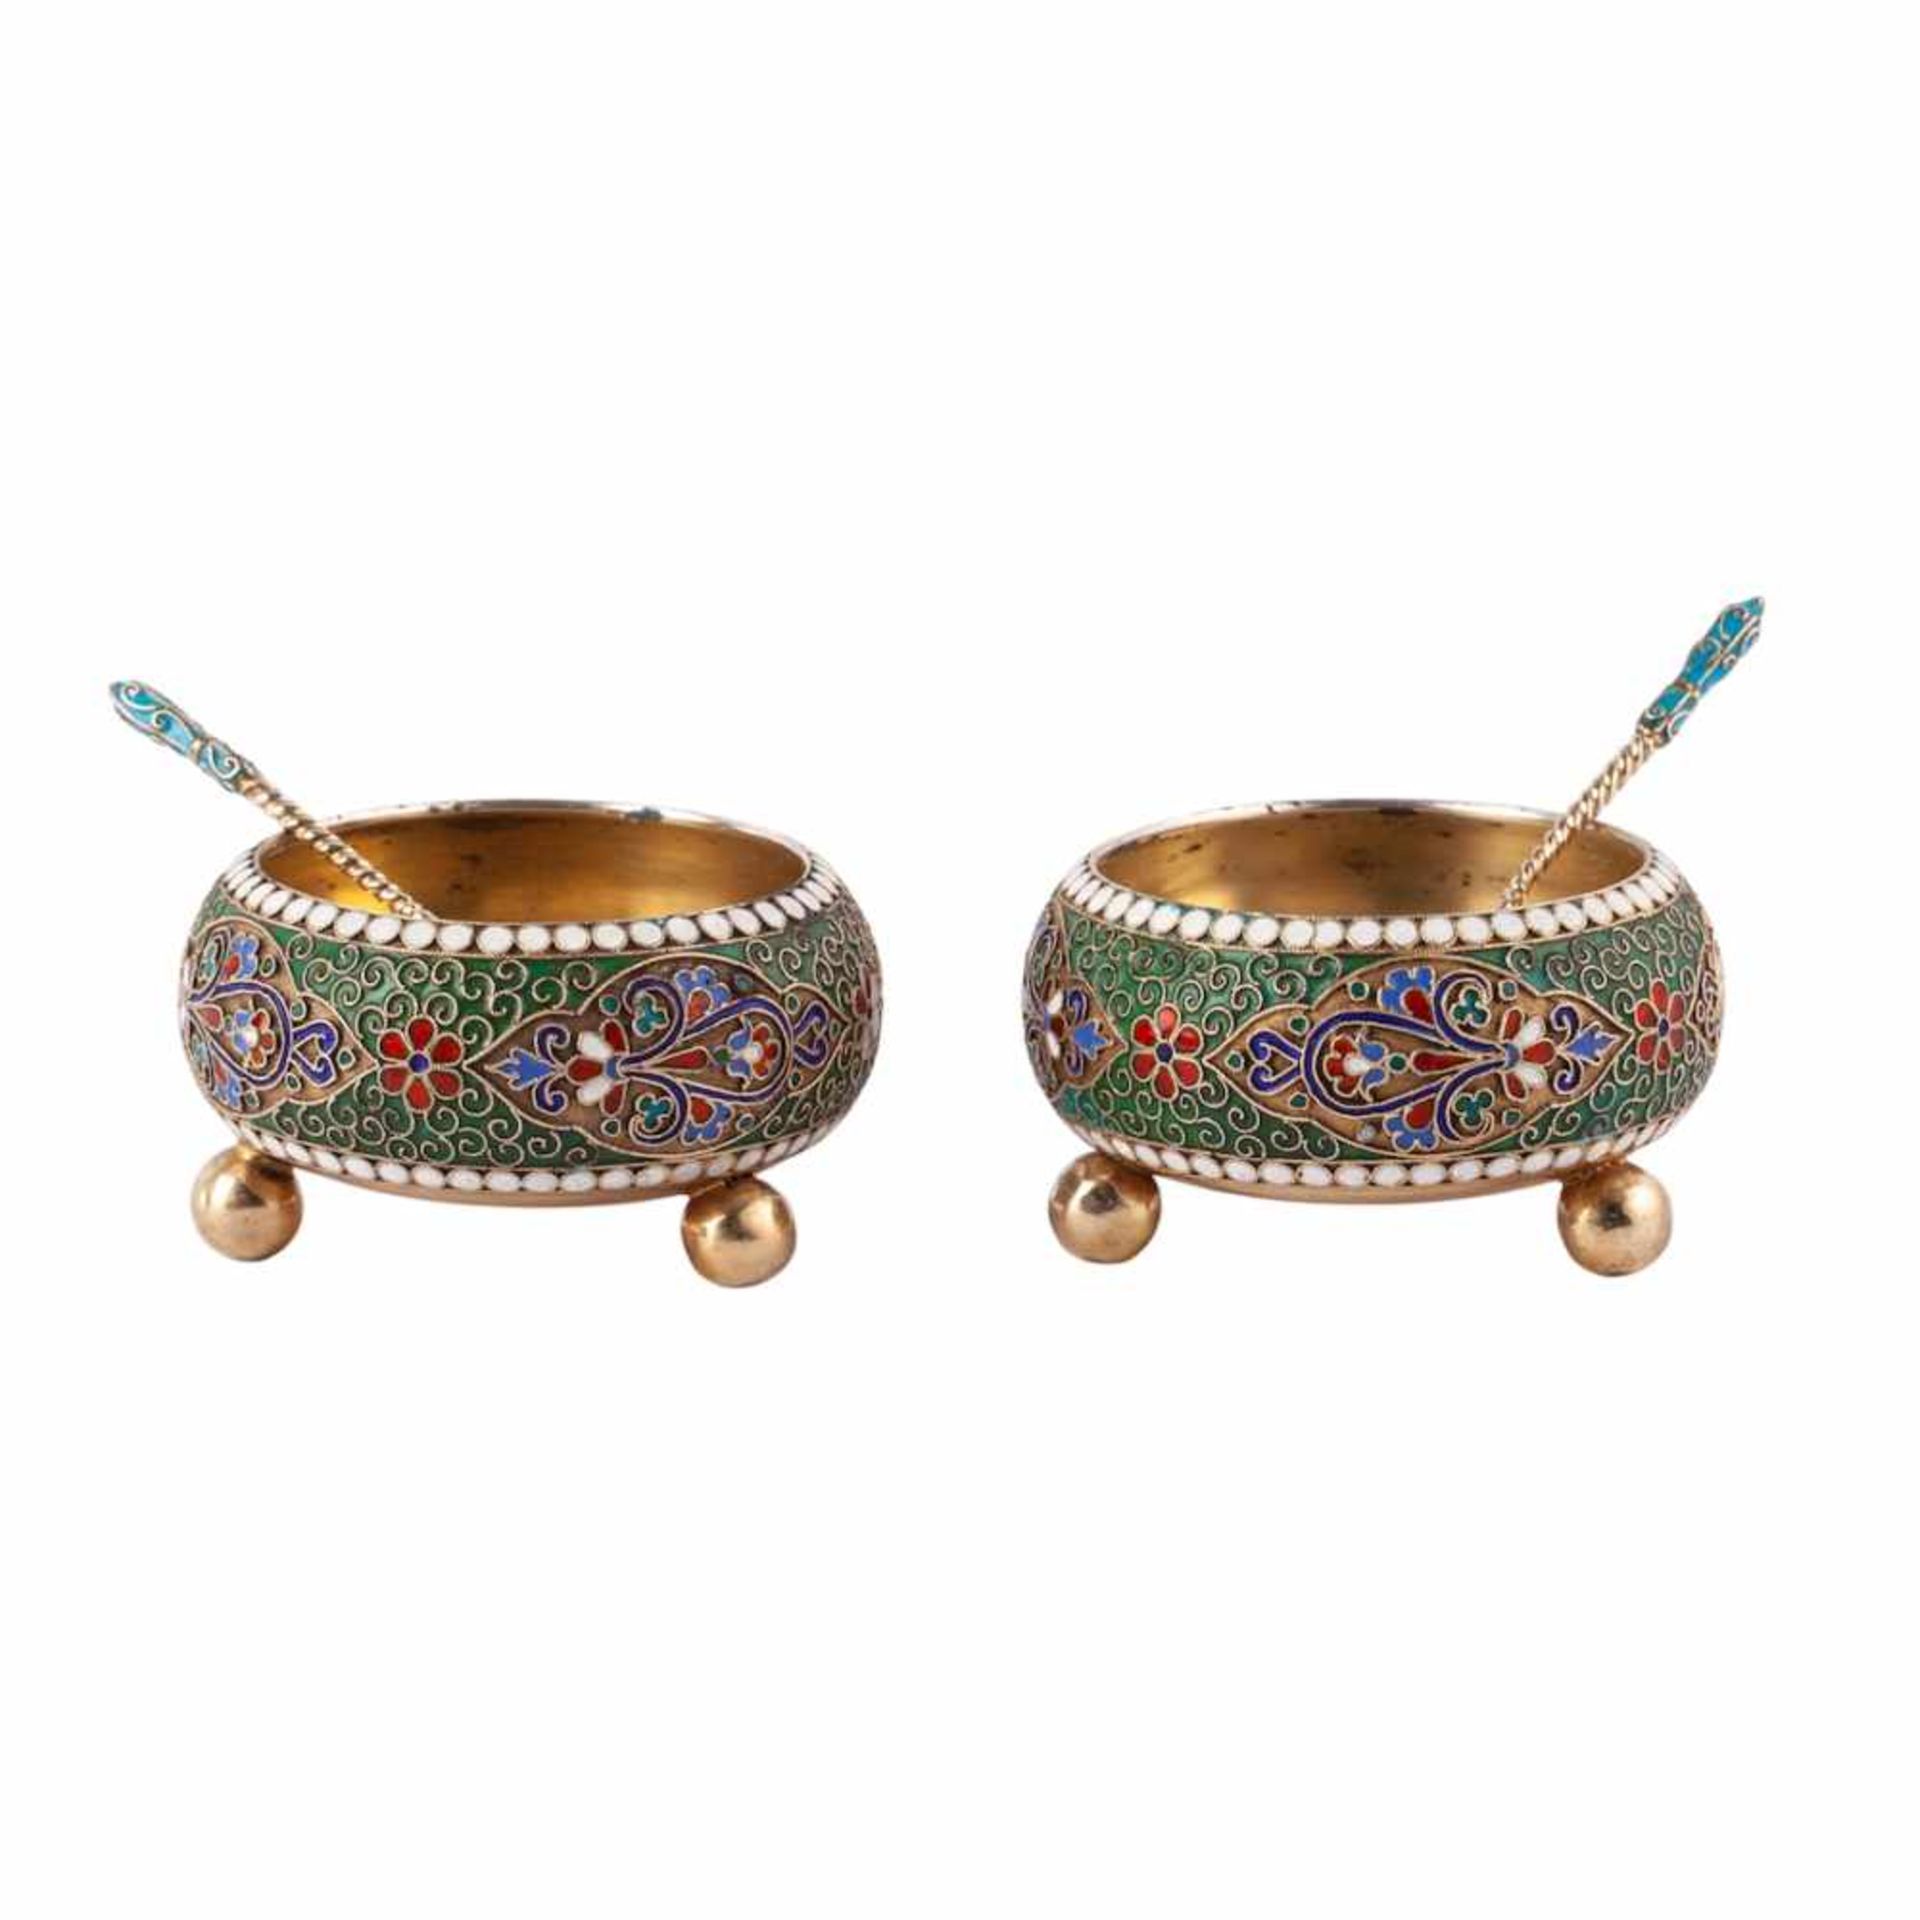 A pair of massive silver and enamel salt cellars